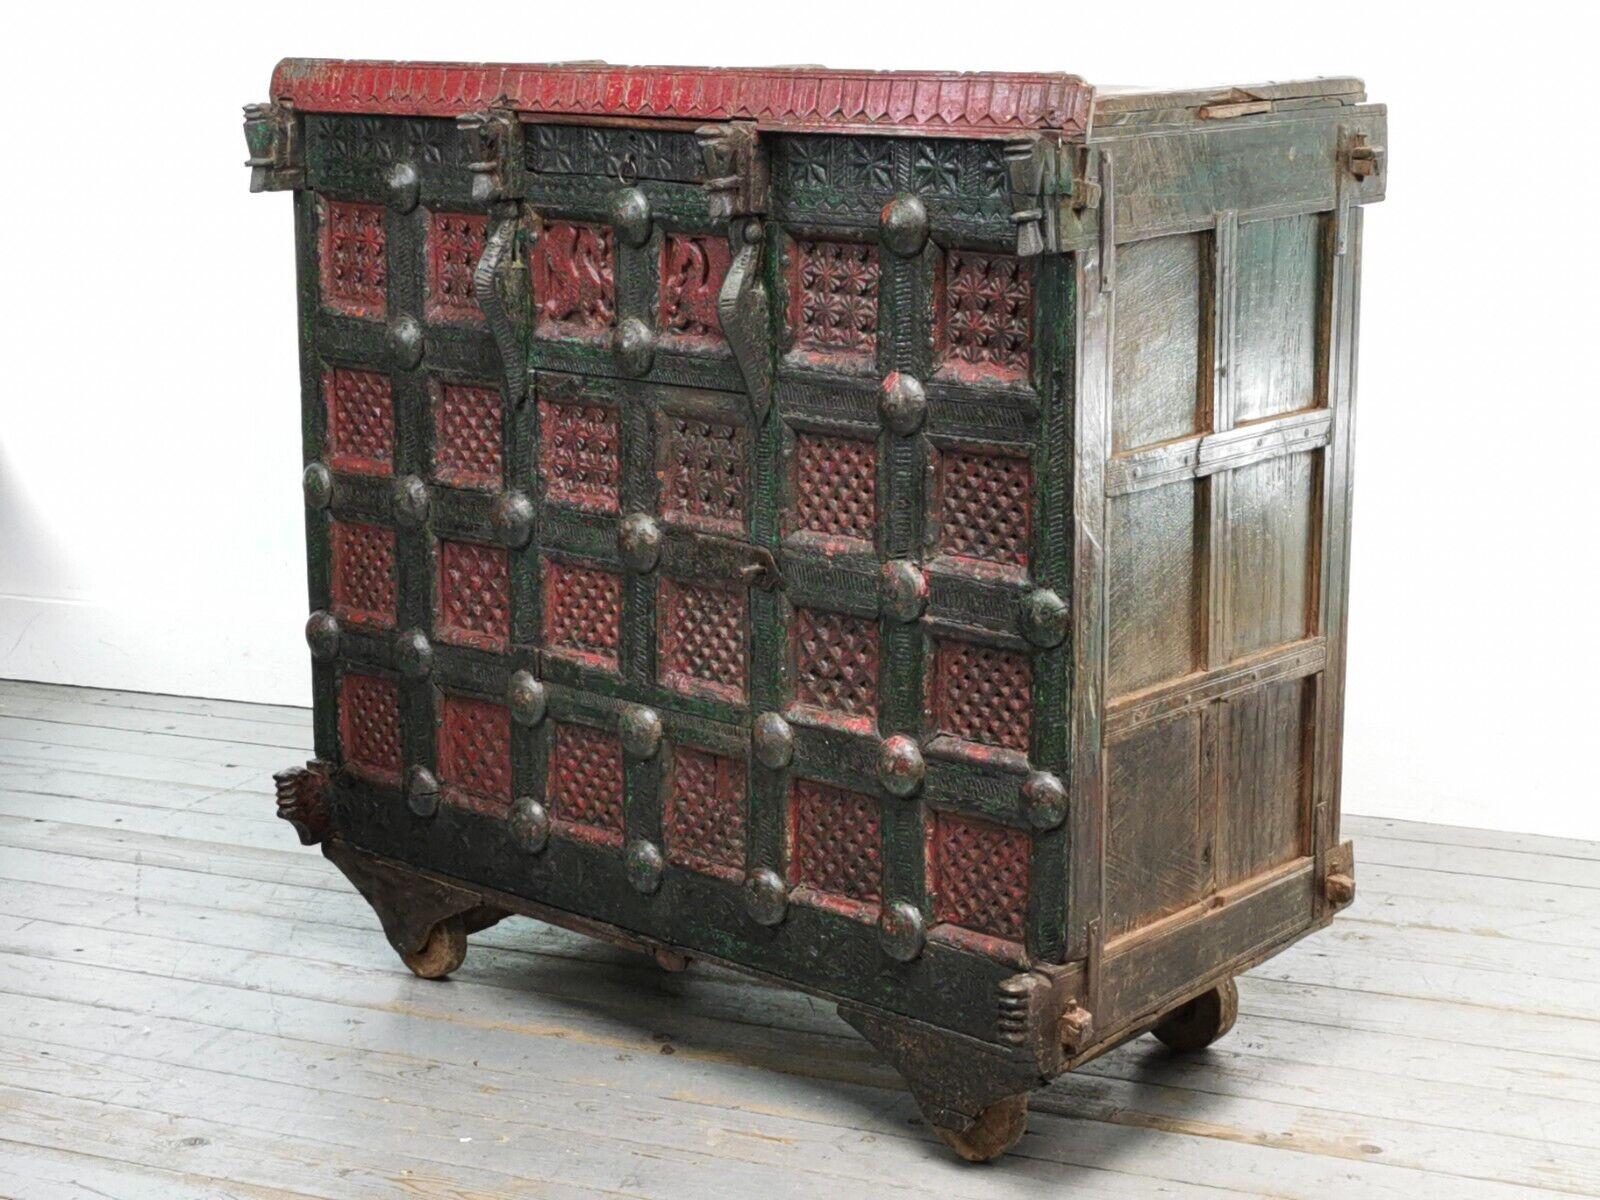 Antique Indian Damchiya with extensively carved wood. The traditional box was used as a dowry for Indian brides and gifted at weddings. It has panelled sides and secret compartments and was previously used to store clothing, household linen, and